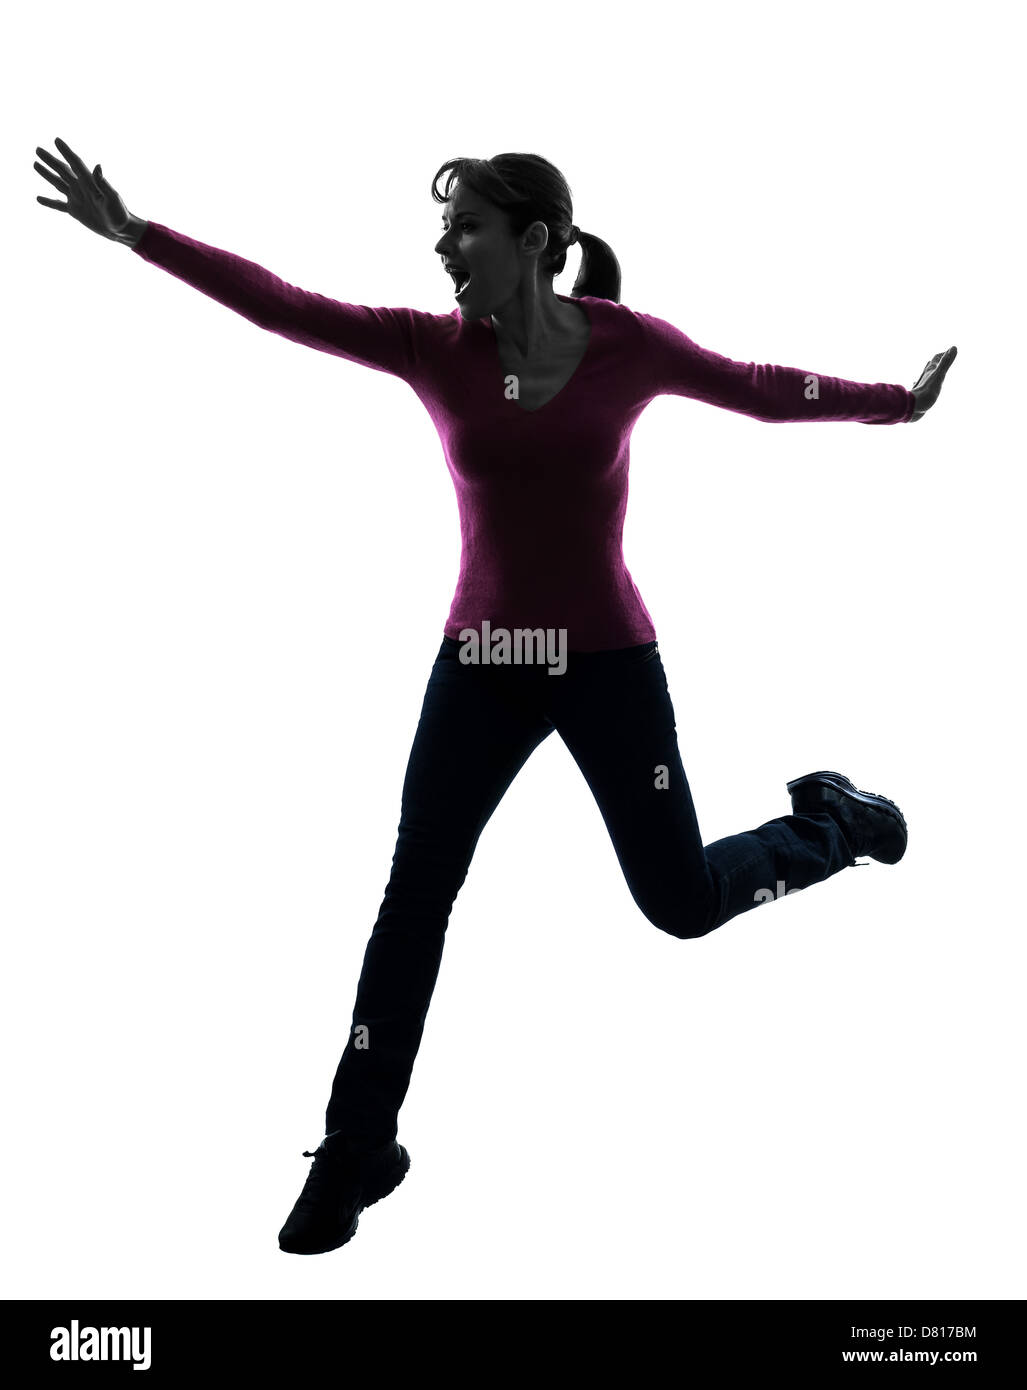 one  woman happy running jumping in silhouette studio isolated on white background Stock Photo